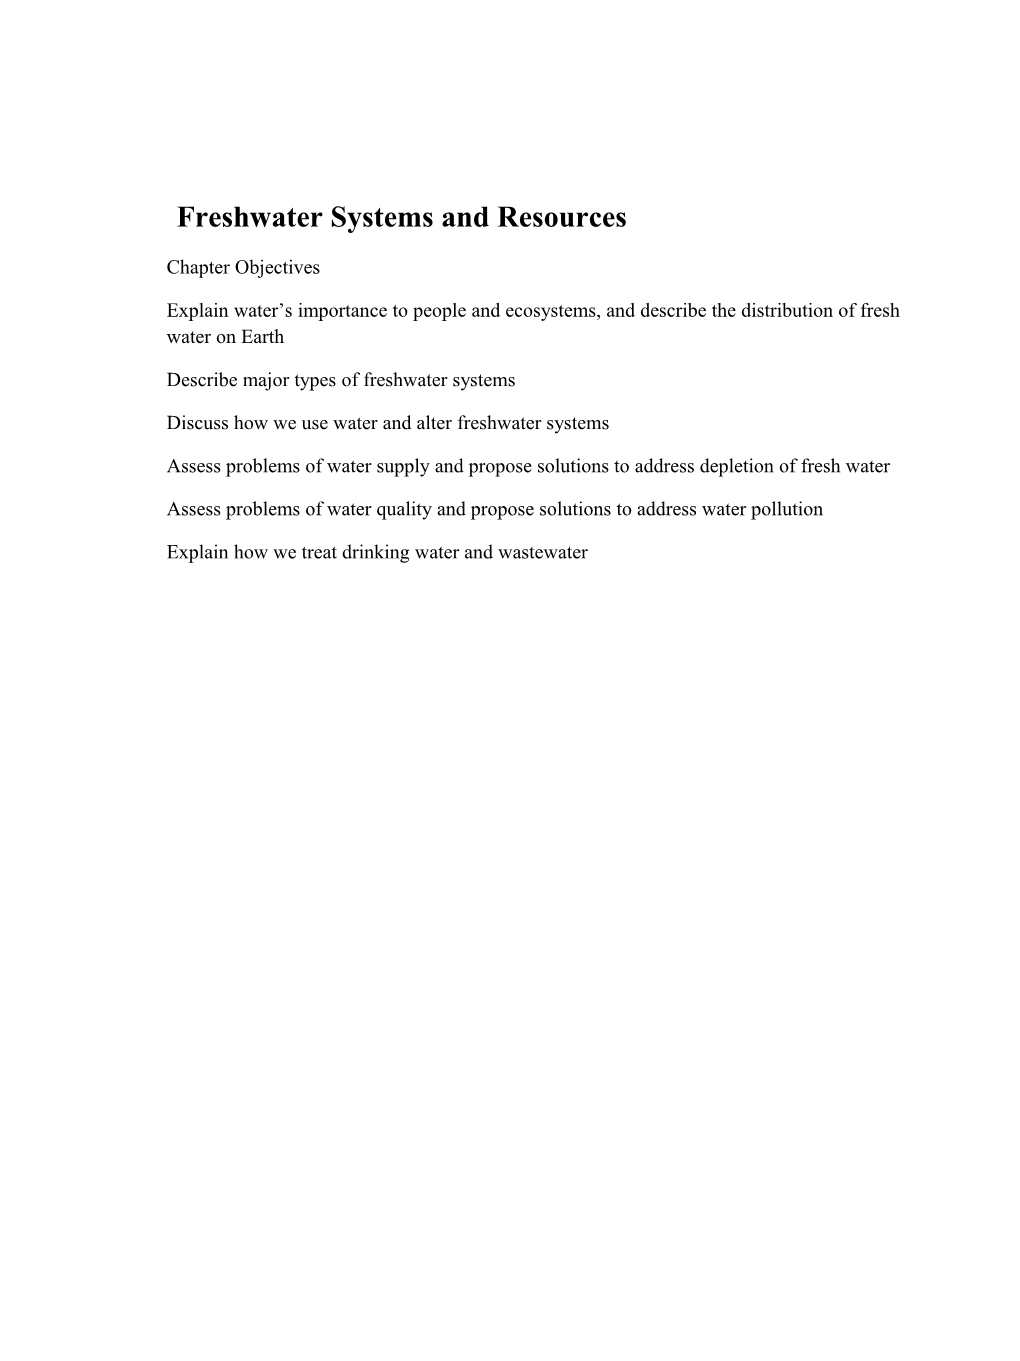 Freshwater Systems and Resources